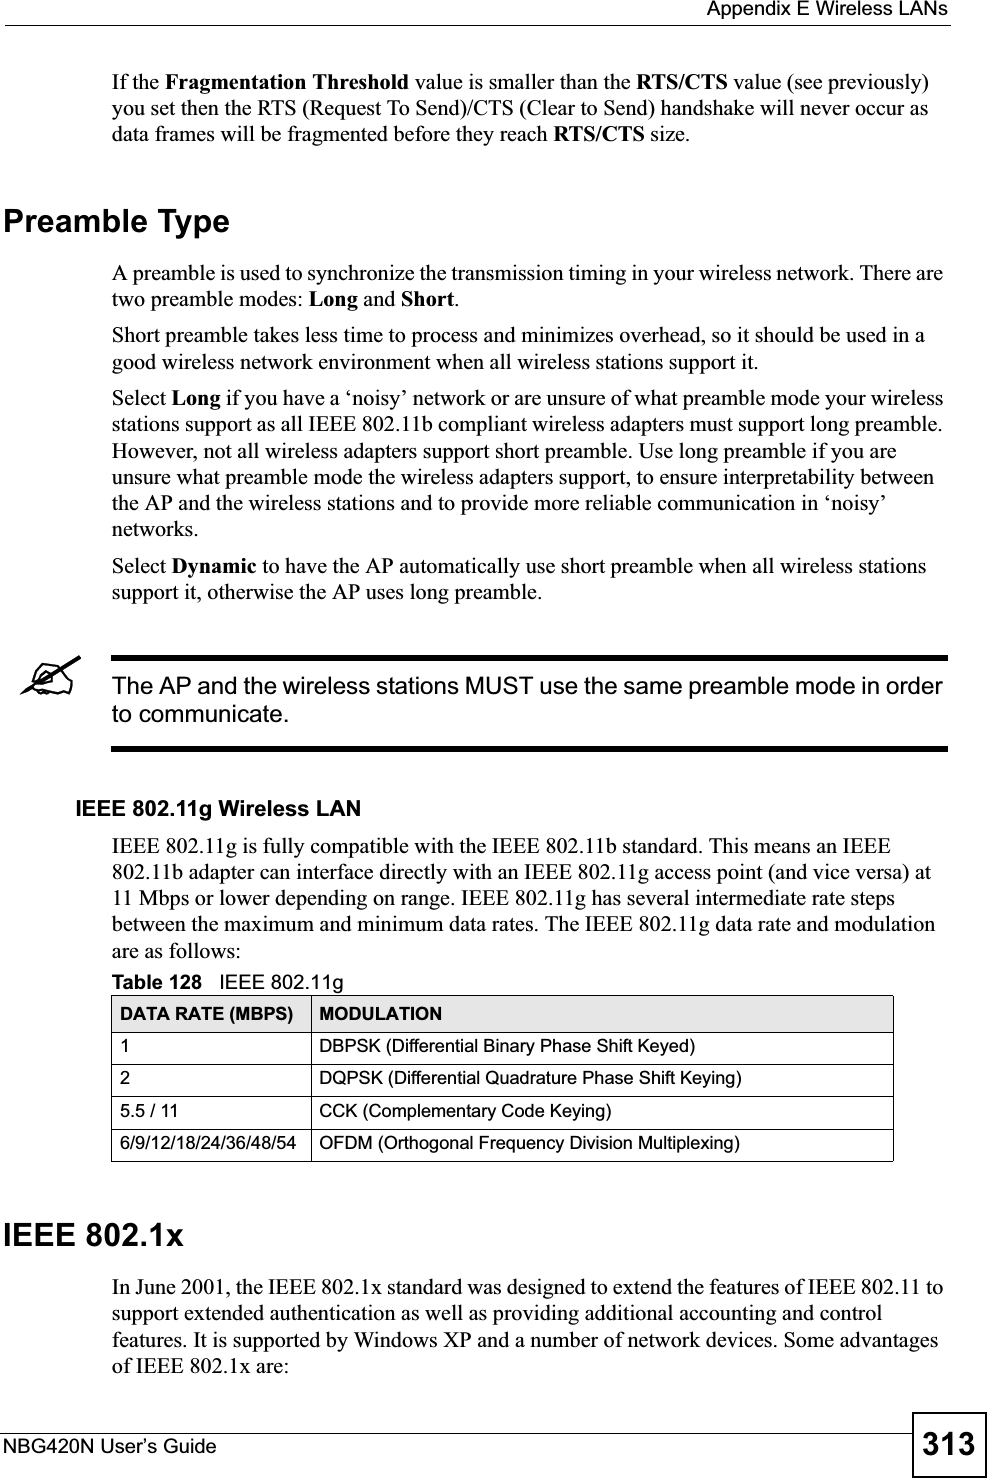  Appendix E Wireless LANsNBG420N User’s Guide 313If the Fragmentation Threshold value is smaller than the RTS/CTS value (see previously) you set then the RTS (Request To Send)/CTS (Clear to Send) handshake will never occur as data frames will be fragmented before they reach RTS/CTS size.Preamble TypeA preamble is used to synchronize the transmission timing in your wireless network. There are two preamble modes: Long and Short.Short preamble takes less time to process and minimizes overhead, so it should be used in a good wireless network environment when all wireless stations support it. Select Long if you have a ‘noisy’ network or are unsure of what preamble mode your wireless stations support as all IEEE 802.11b compliant wireless adapters must support long preamble. However, not all wireless adapters support short preamble. Use long preamble if you are unsure what preamble mode the wireless adapters support, to ensure interpretability between the AP and the wireless stations and to provide more reliable communication in ‘noisy’ networks. Select Dynamic to have the AP automatically use short preamble when all wireless stations support it, otherwise the AP uses long preamble.&quot;The AP and the wireless stations MUST use the same preamble mode in order to communicate.IEEE 802.11g Wireless LANIEEE 802.11g is fully compatible with the IEEE 802.11b standard. This means an IEEE 802.11b adapter can interface directly with an IEEE 802.11g access point (and vice versa) at 11 Mbps or lower depending on range. IEEE 802.11g has several intermediate rate steps between the maximum and minimum data rates. The IEEE 802.11g data rate and modulation are as follows:IEEE 802.1xIn June 2001, the IEEE 802.1x standard was designed to extend the features of IEEE 802.11 to support extended authentication as well as providing additional accounting and control features. It is supported by Windows XP and a number of network devices. Some advantages of IEEE 802.1x are:Table 128   IEEE 802.11gDATA RATE (MBPS) MODULATION1 DBPSK (Differential Binary Phase Shift Keyed)2 DQPSK (Differential Quadrature Phase Shift Keying)5.5 / 11 CCK (Complementary Code Keying) 6/9/12/18/24/36/48/54 OFDM (Orthogonal Frequency Division Multiplexing) 